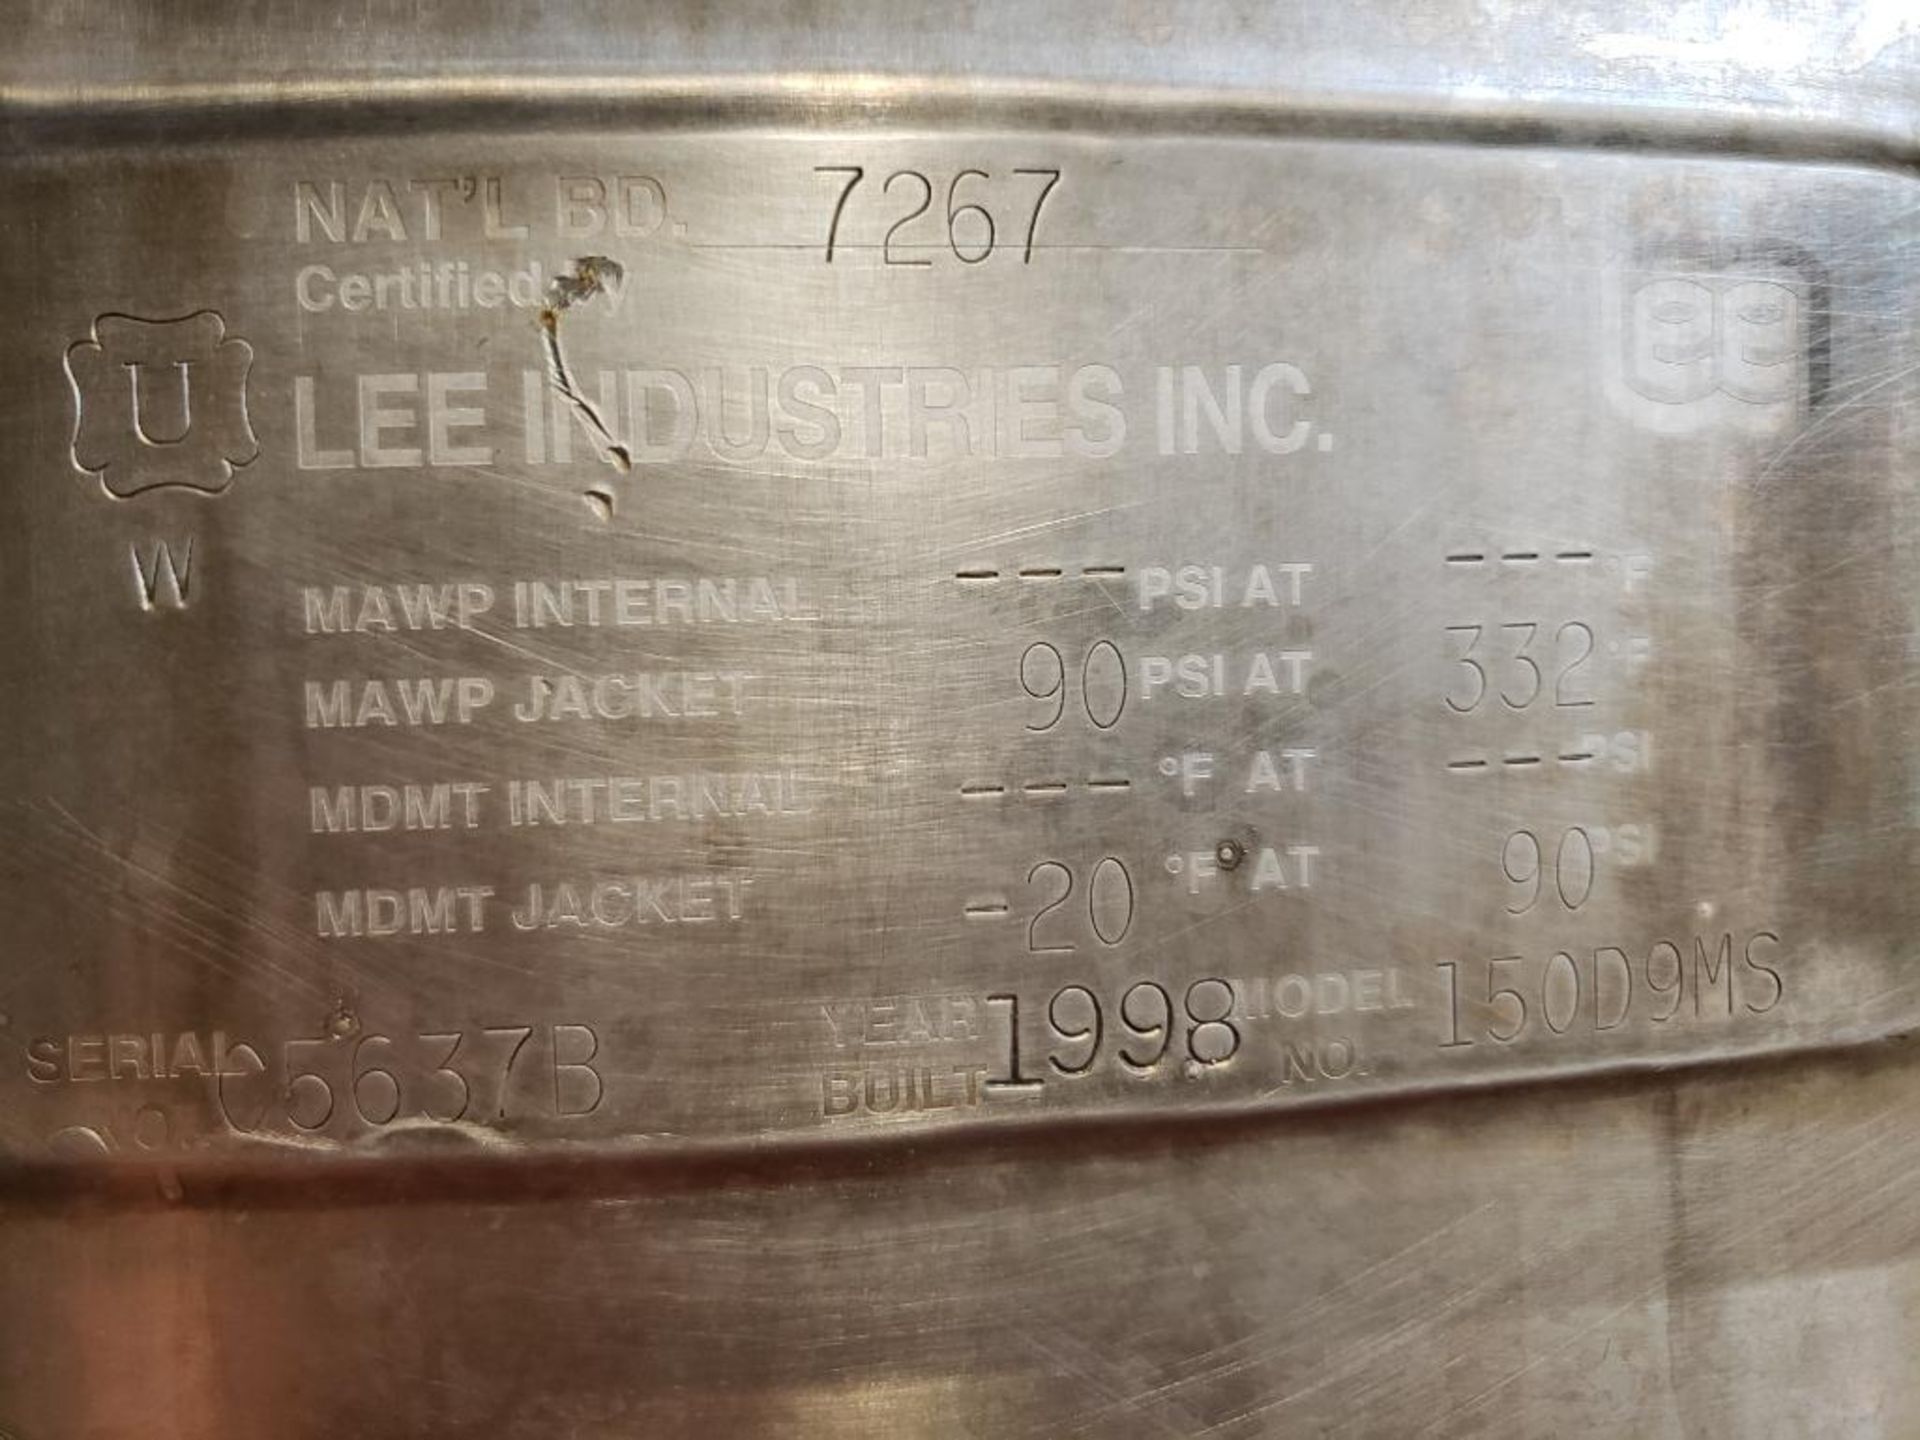 Lee Industries Stainless Steel Jacketed Kettle - Image 2 of 6